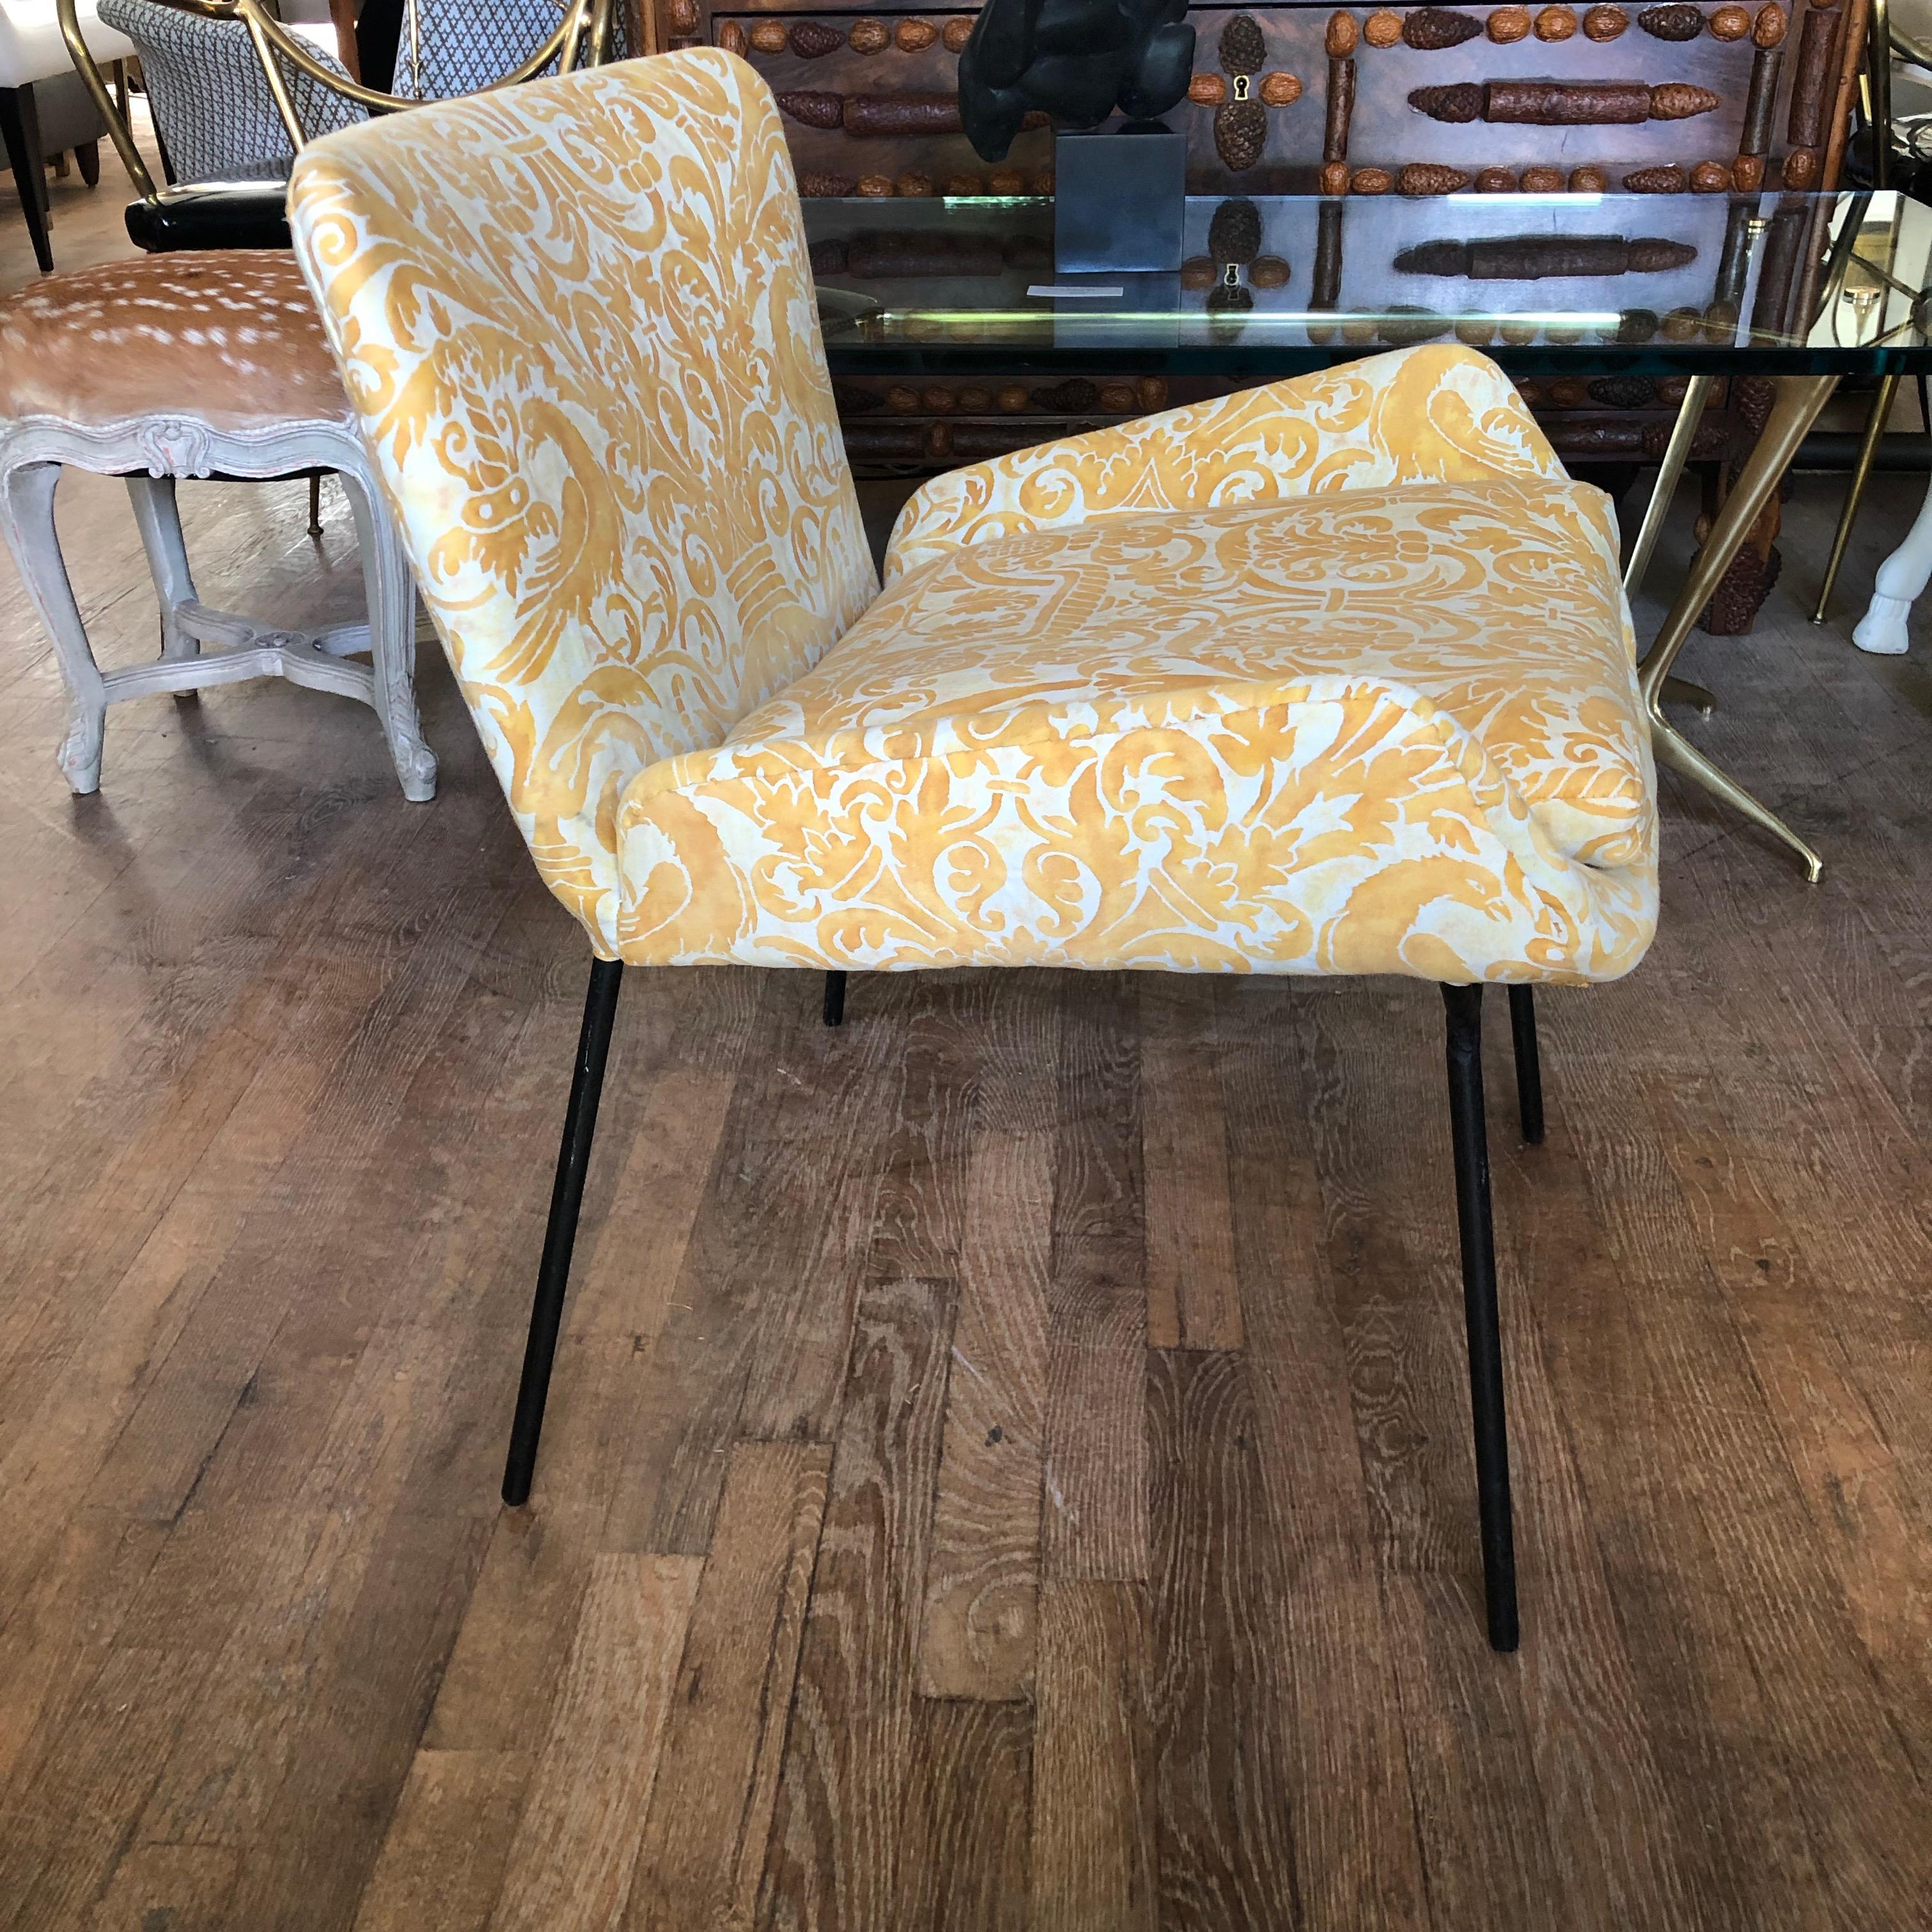 Whimsical midcentury Italian chair newly upholstered in a cheery and sophisticated yellow Fortuny cotton. It has an iron frame.